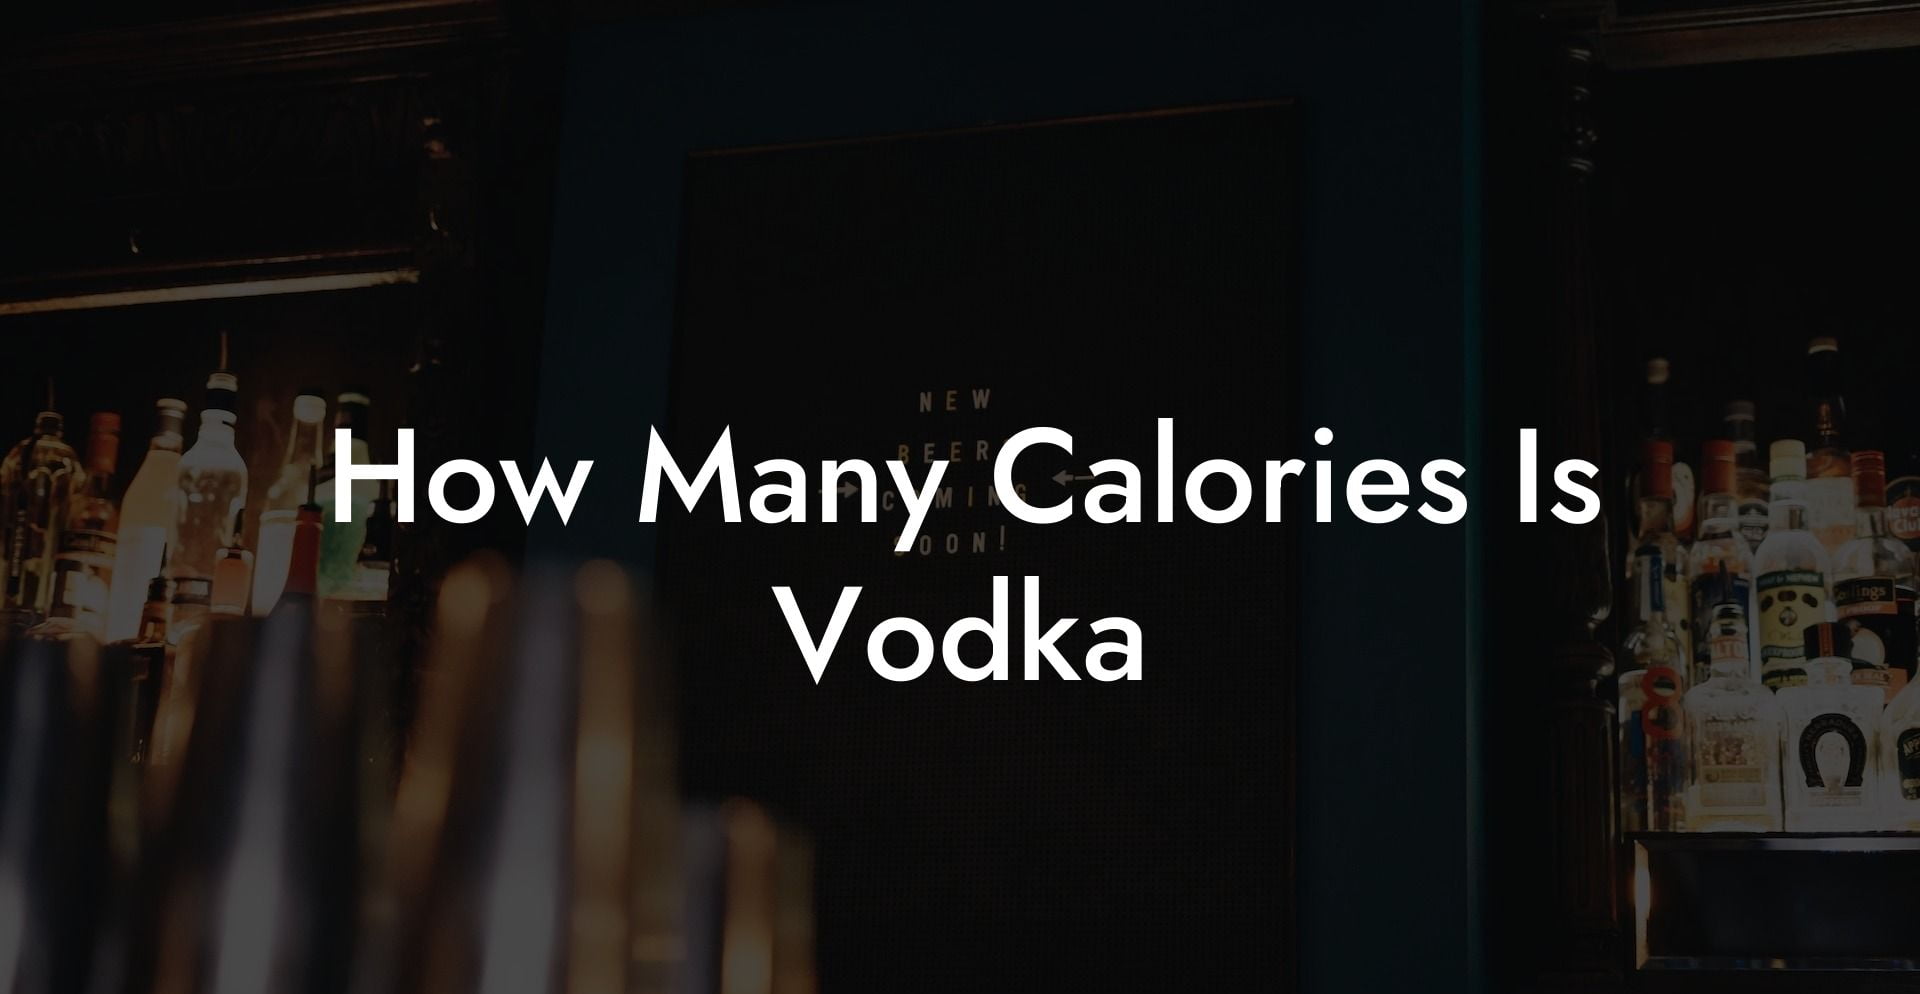 How Many Calories Is Vodka